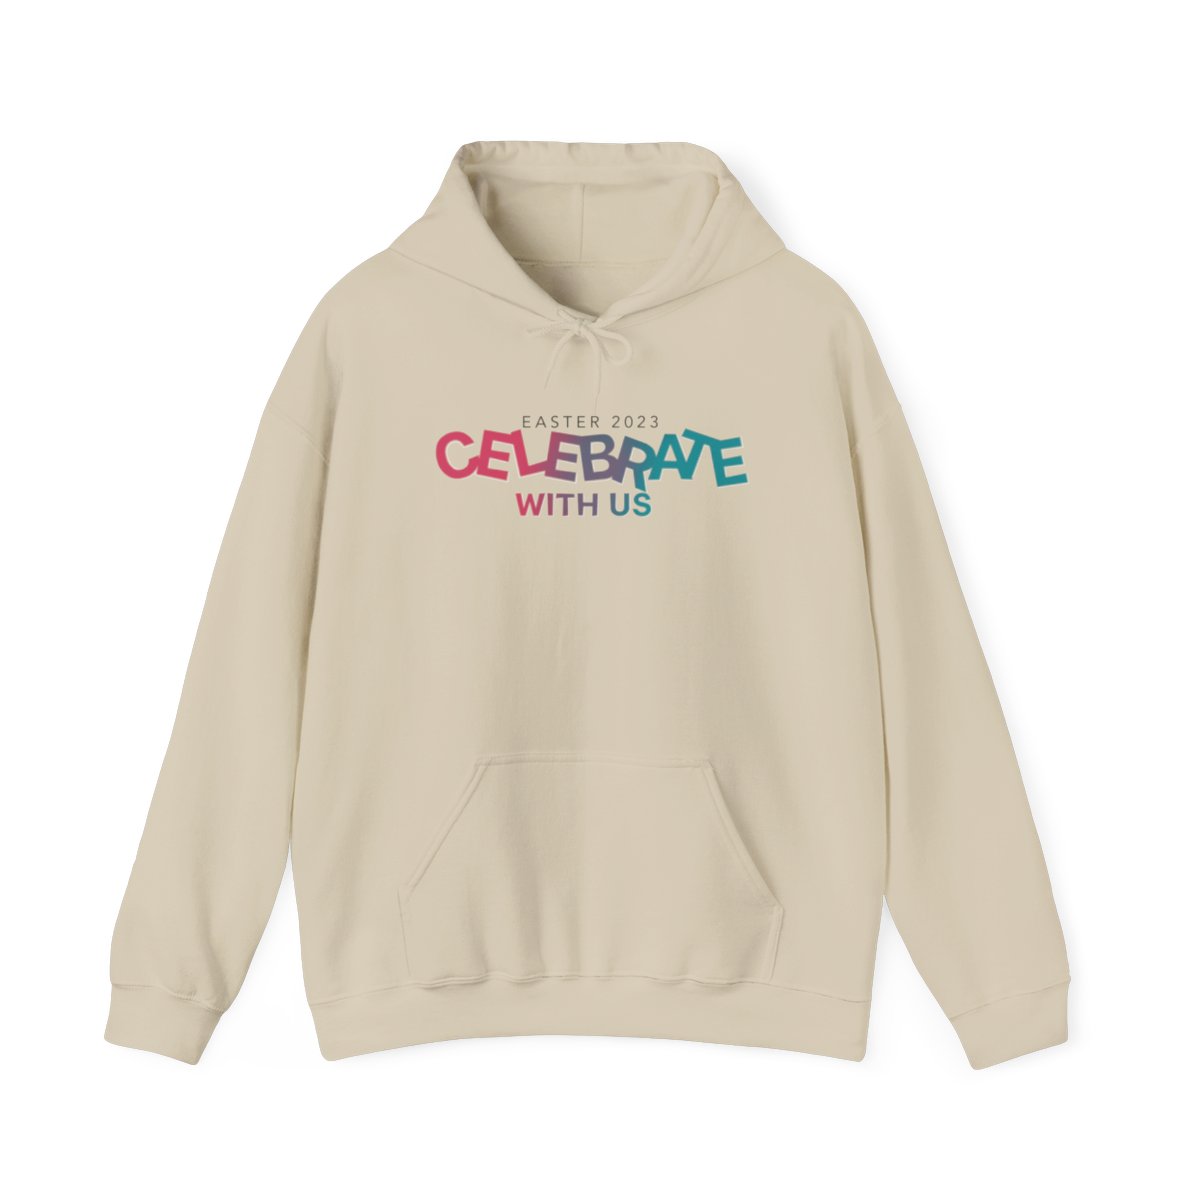 Celebrate With Us - Easter 2023 Hoodie product main image